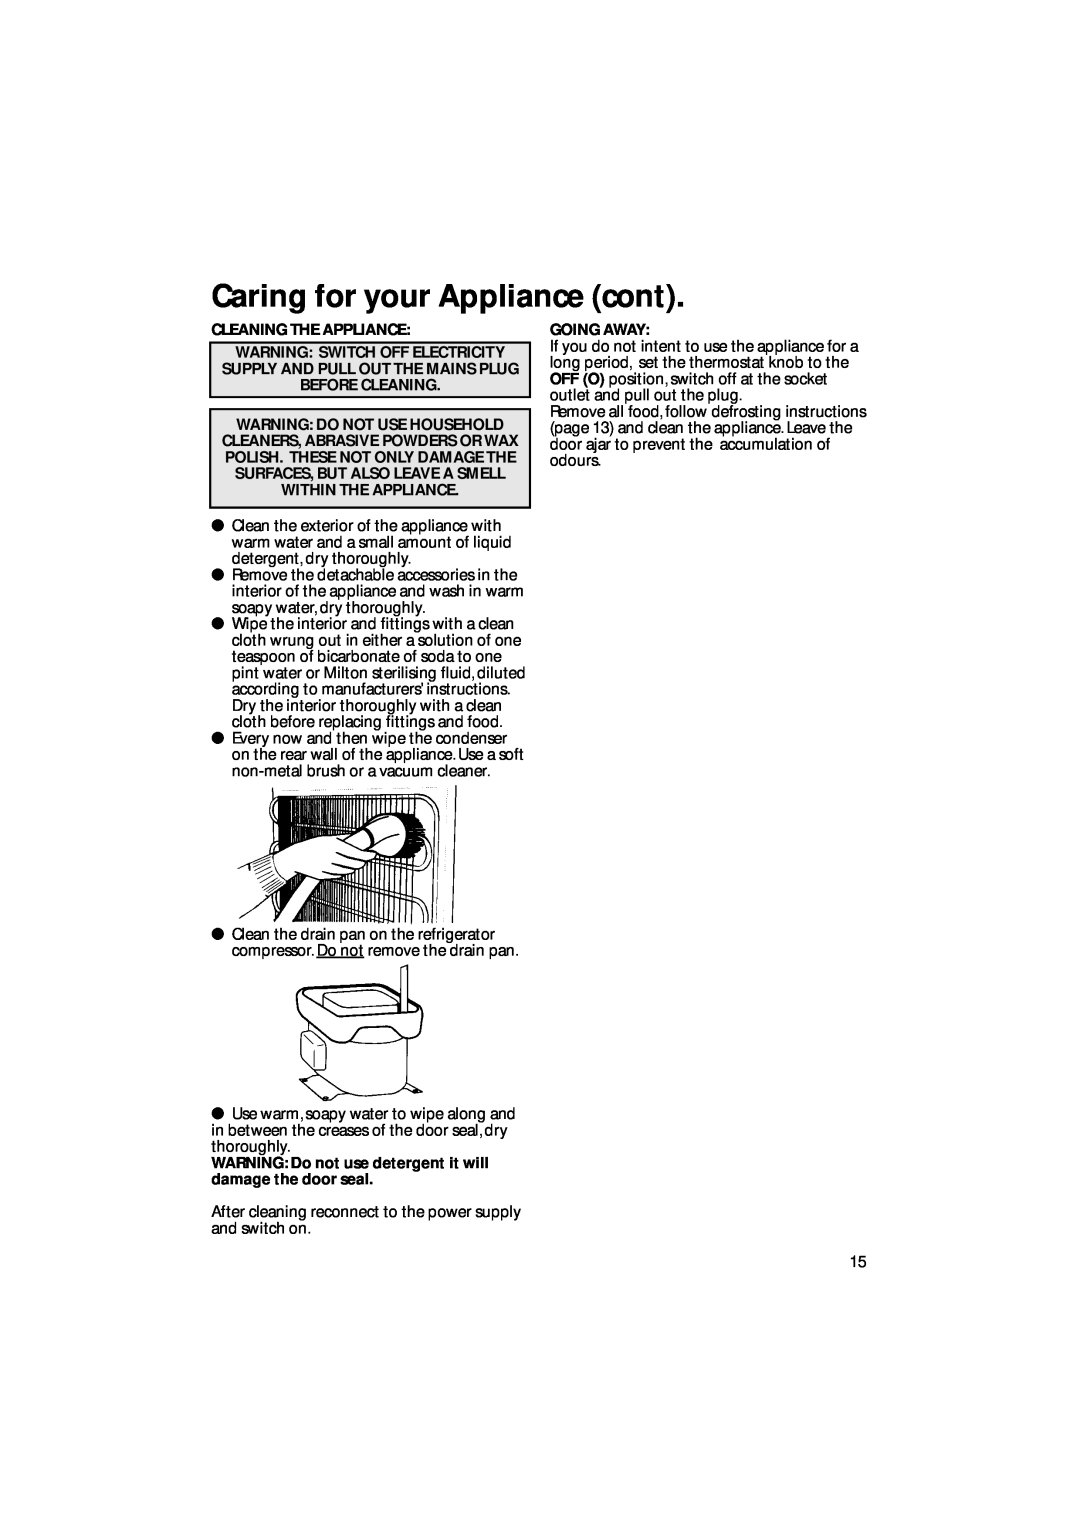 Hotpoint BM10, BM21 manual Caring for your Appliance cont, Cleaning The Appliance, Going Away 